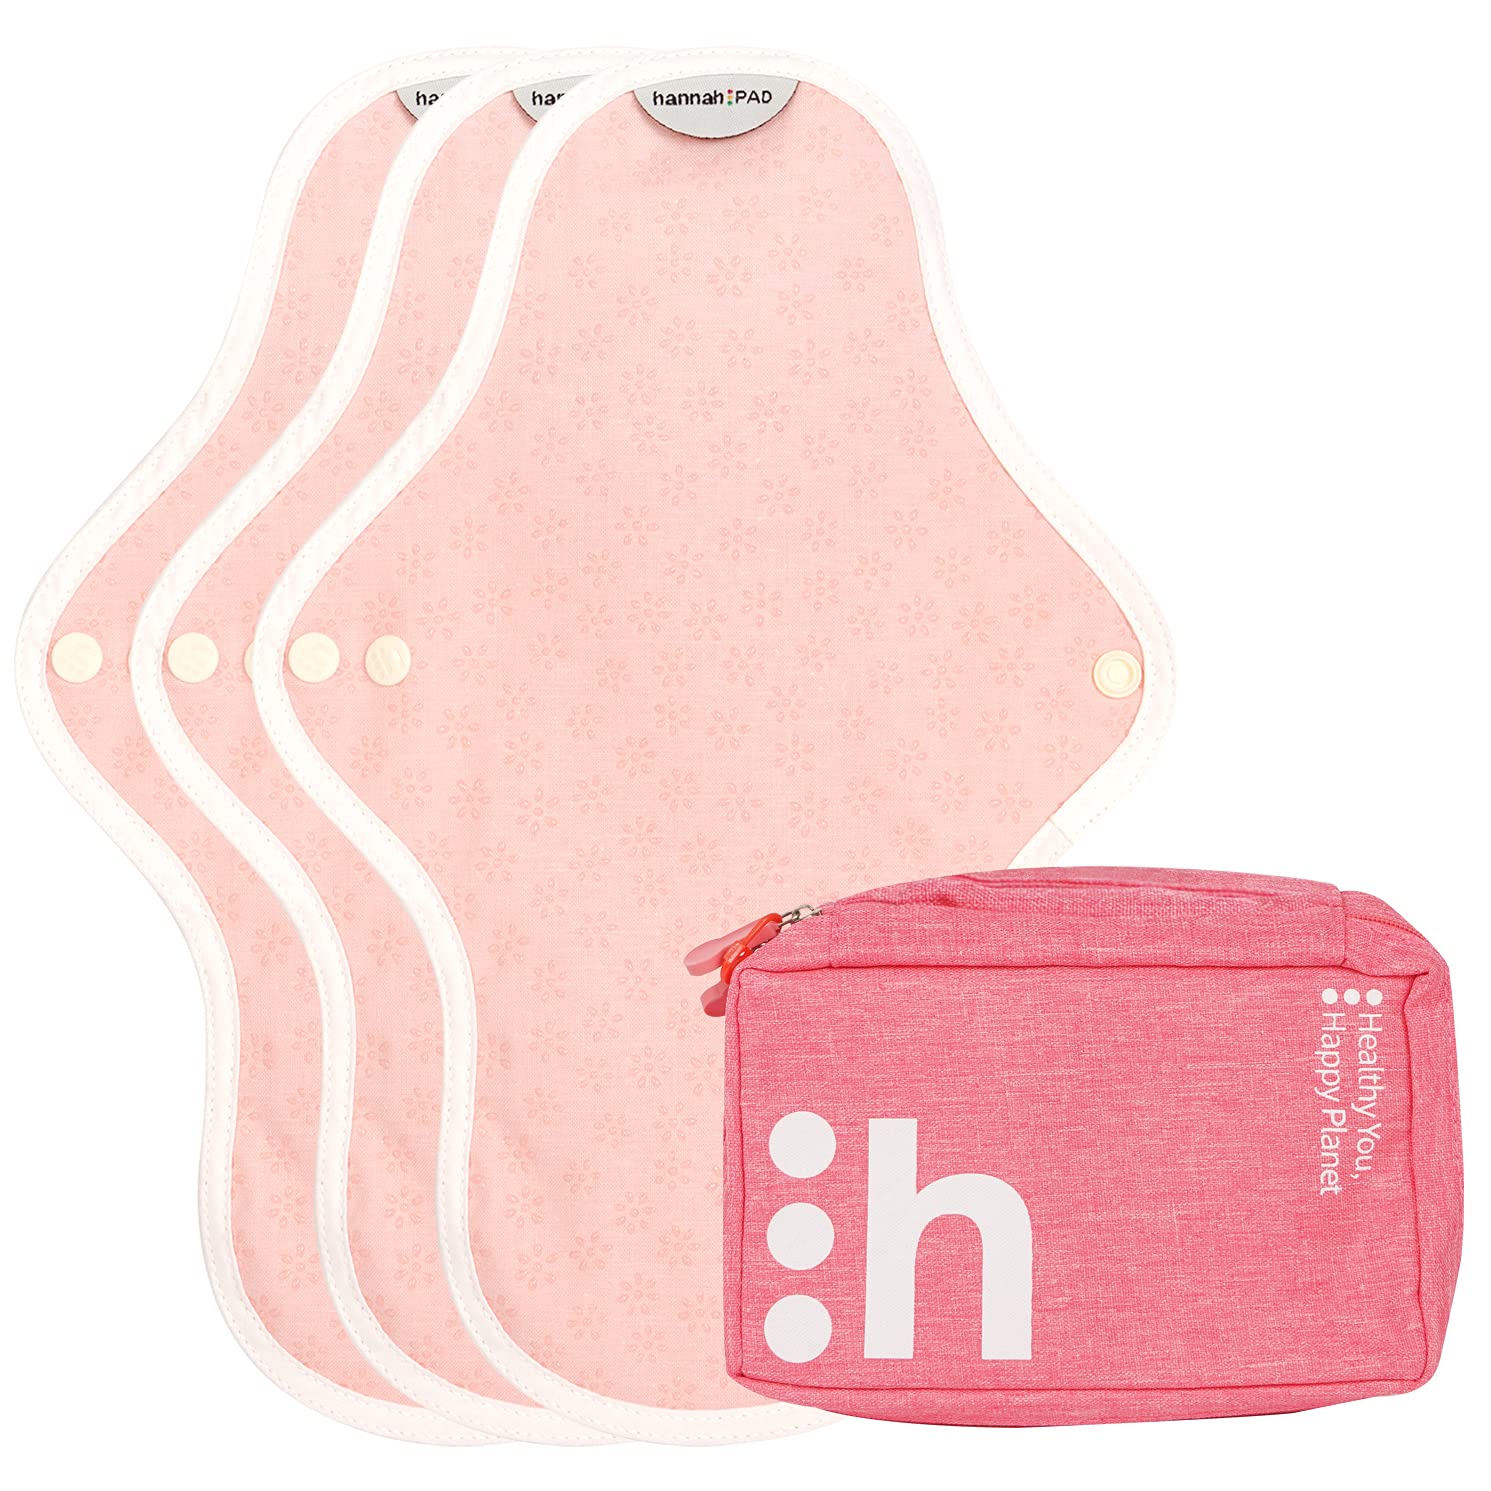 hannahPAD Organic Reusable Washable Sanitary Cloth Pads (3 Medium Pads, 1 Carry Pouch, Flower Garden Pink)